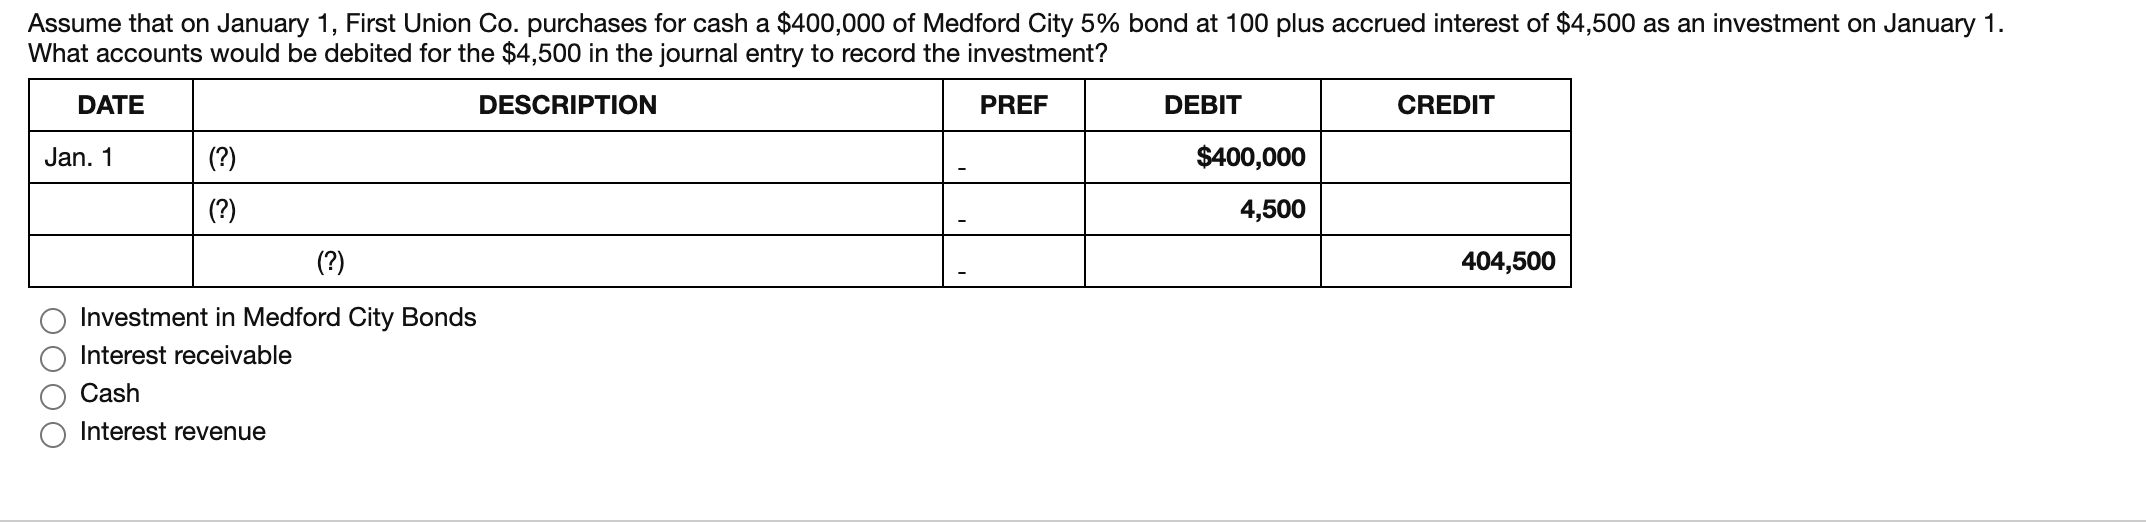 Assume that on January 1, First Union Co. purchases for cash a $400,000 of Medford City 5% bond at 100 plus accrued interest of $4,500 as an investment on January 1.
What accounts would be debited for the $4,500 in the journal entry to record the investment?
DATE
DESCRIPTION
PREF
DEBIT
CREDIT
Jan. 1
(?)
$400,000
(?)
4,500
(?)
404,500
Investment in Medford City Bonds
Interest receivable
Cash
Interest revenue
O000
